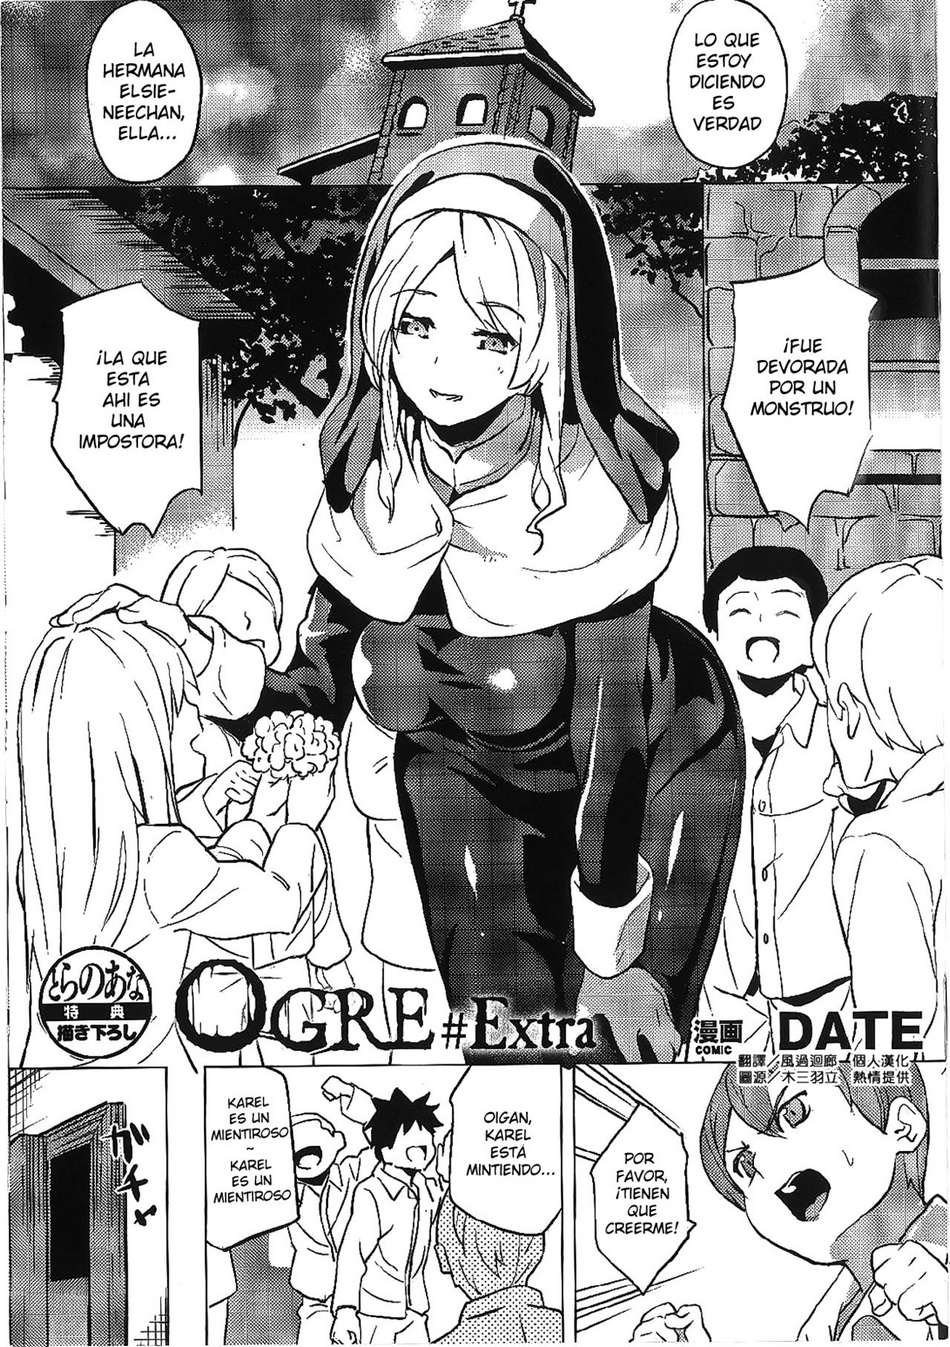 OGRE #Extra - Page #1